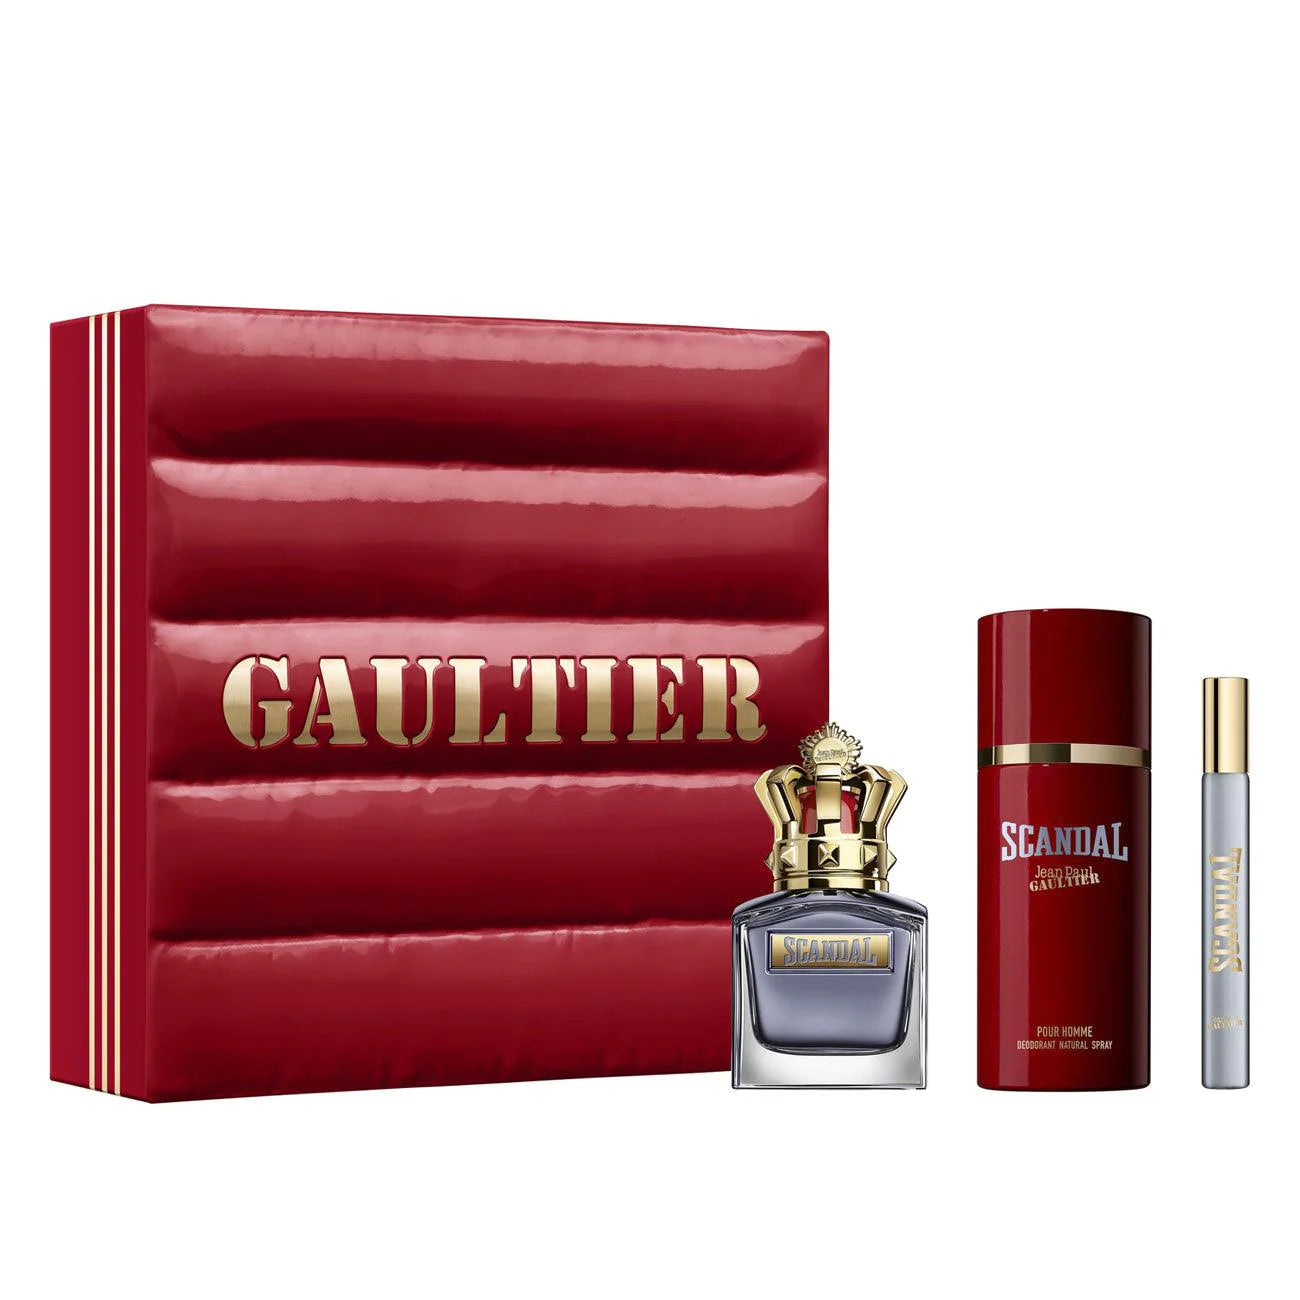 Jean Paul Gaultier Scandal Pour Homme 50ml EDT Gift Set of 3 pieces